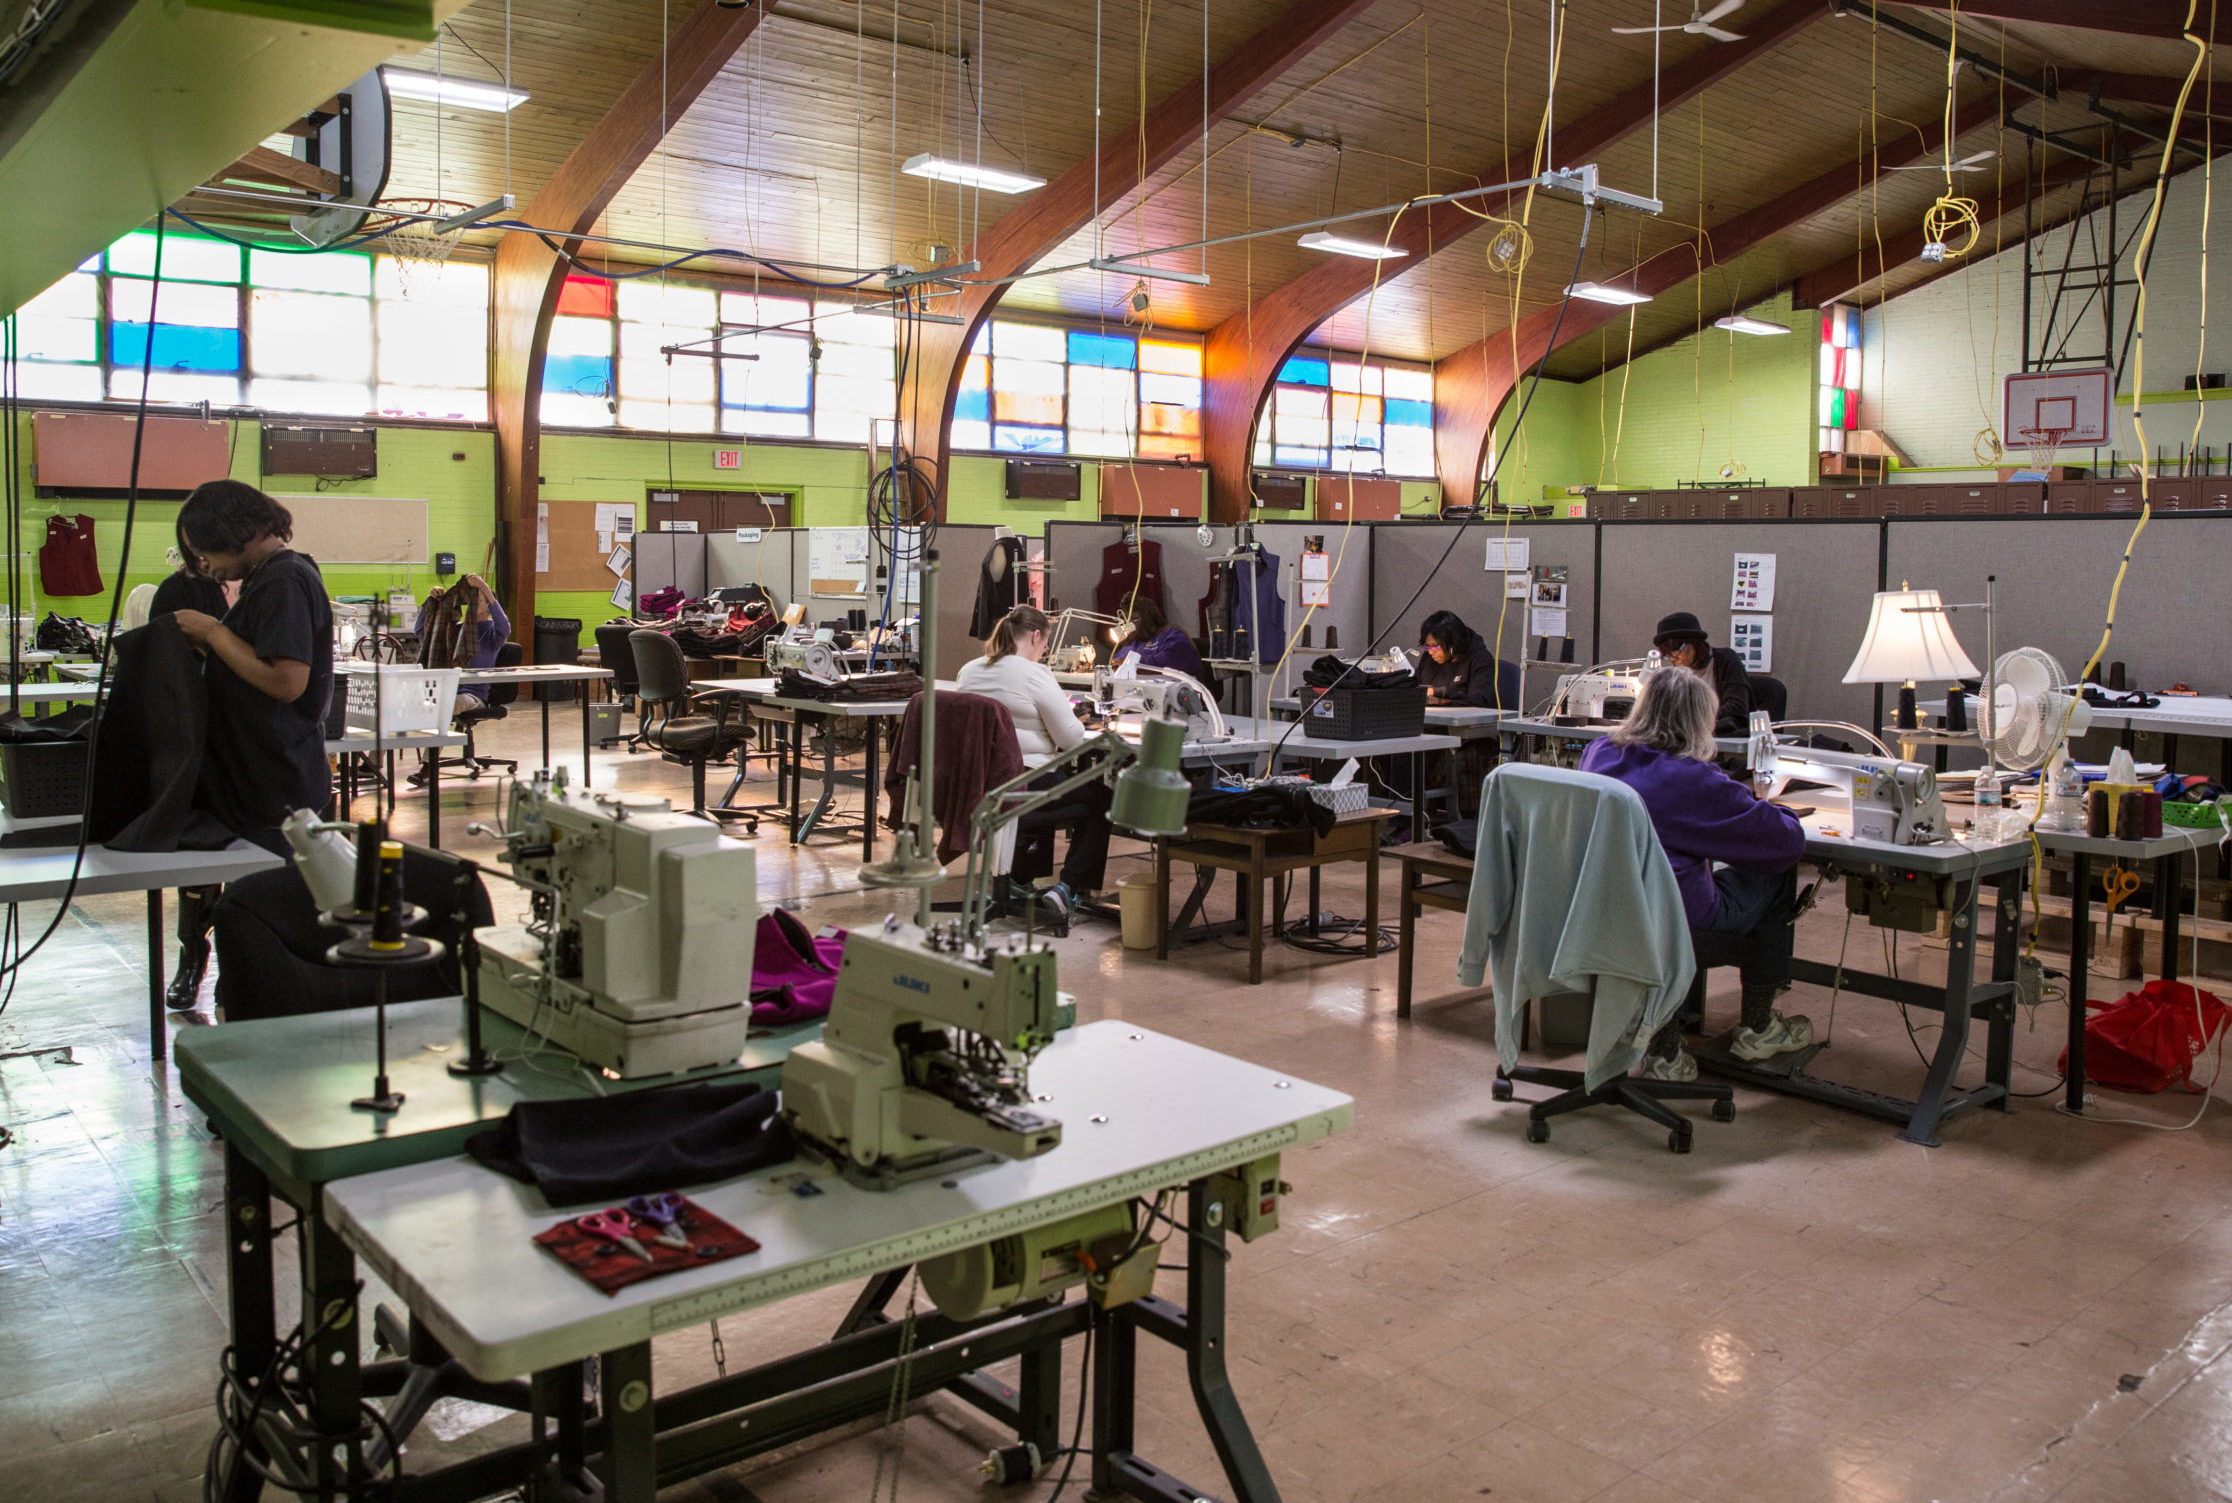 A well-lit room with stained glass windows and many people using sewing machines at St. Luke NEW Life Center